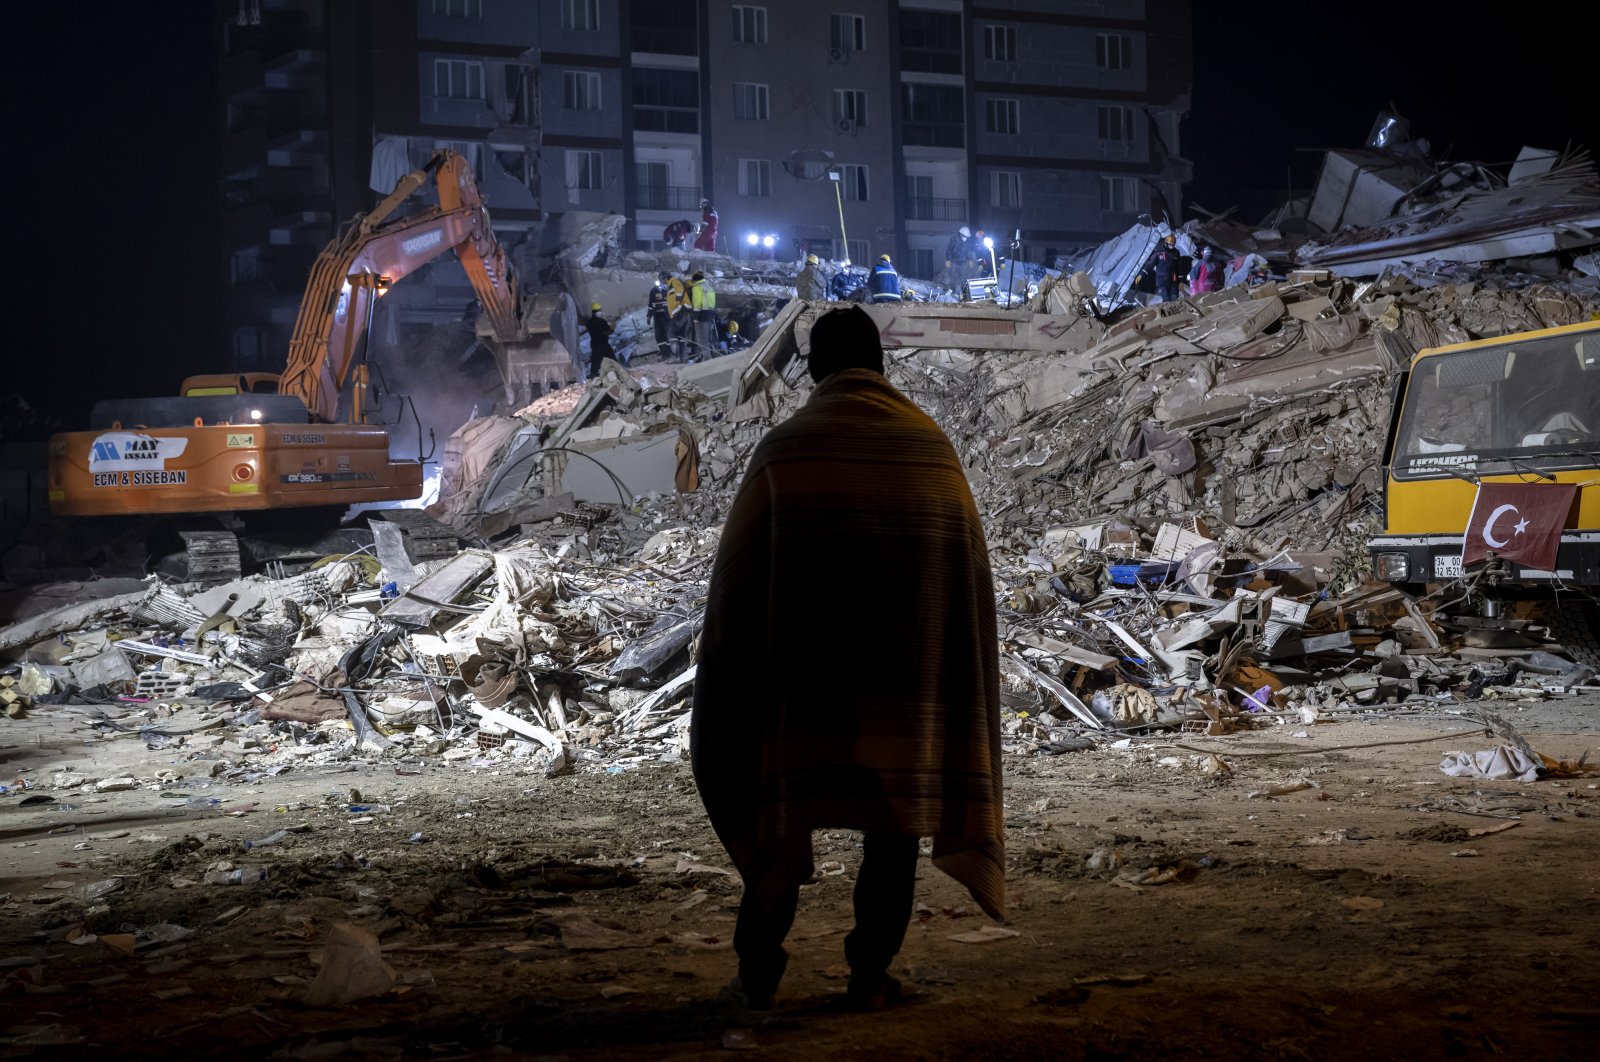 A survivor watches the ongoing rescue work in the debris after the earthquake, Hatay, Türkiye, Feb. 13, 2023. (AA Photo)